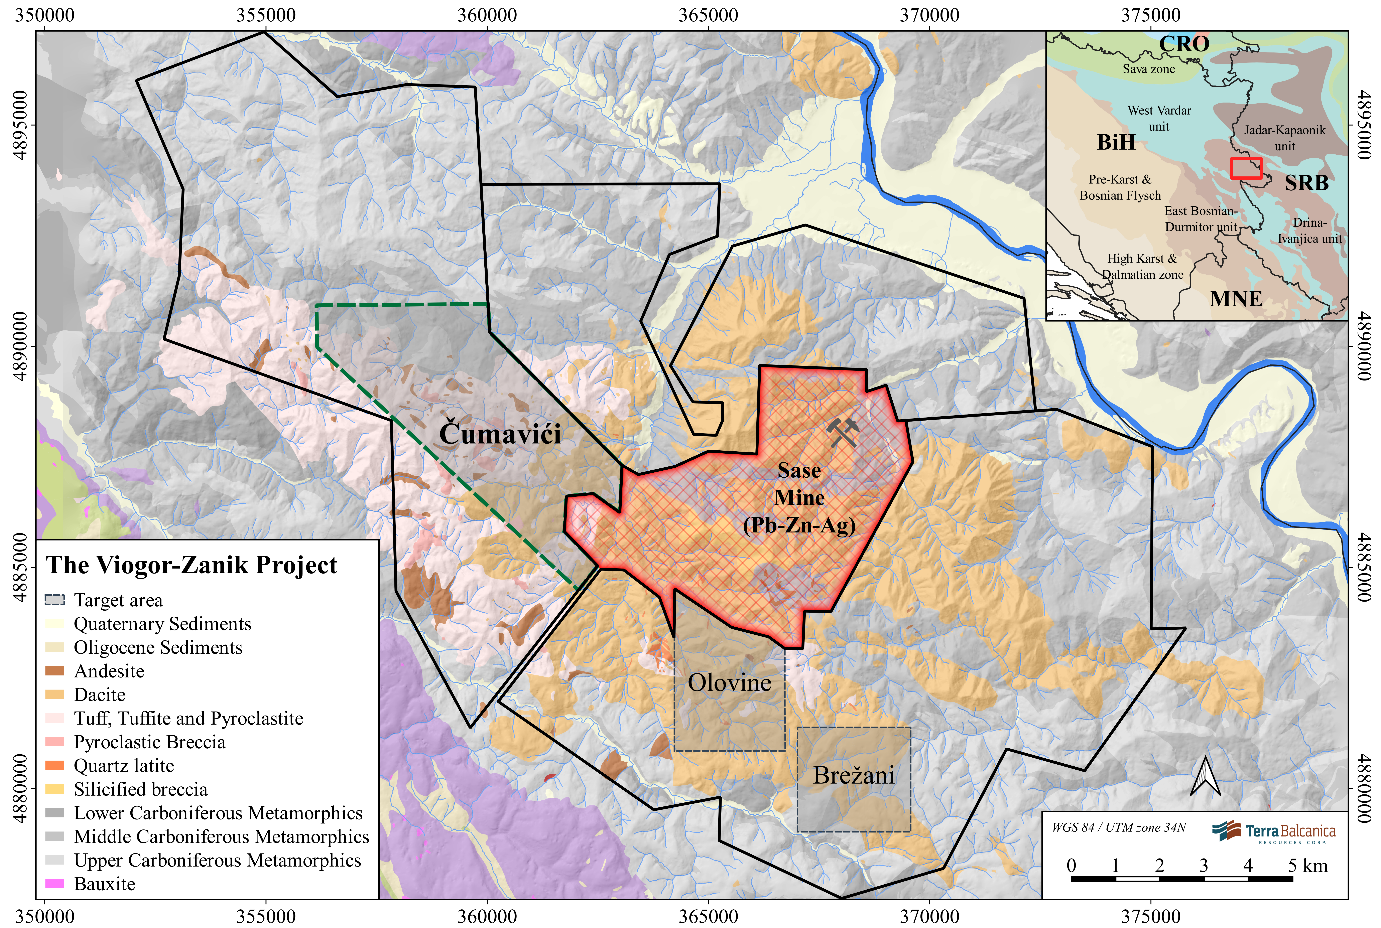 Geological map of the 3-licence, 216 km2 Viogor Zanik project cluster in eastern Bosnia with the Cumavici prospect/licence in its NW sector. The Sase mine (Mineco Ltd.) producing 330,000 tpa of Pb-Zn-Ag concentrate is located at the centre of Terra Balcanica’s exploration portfolio.